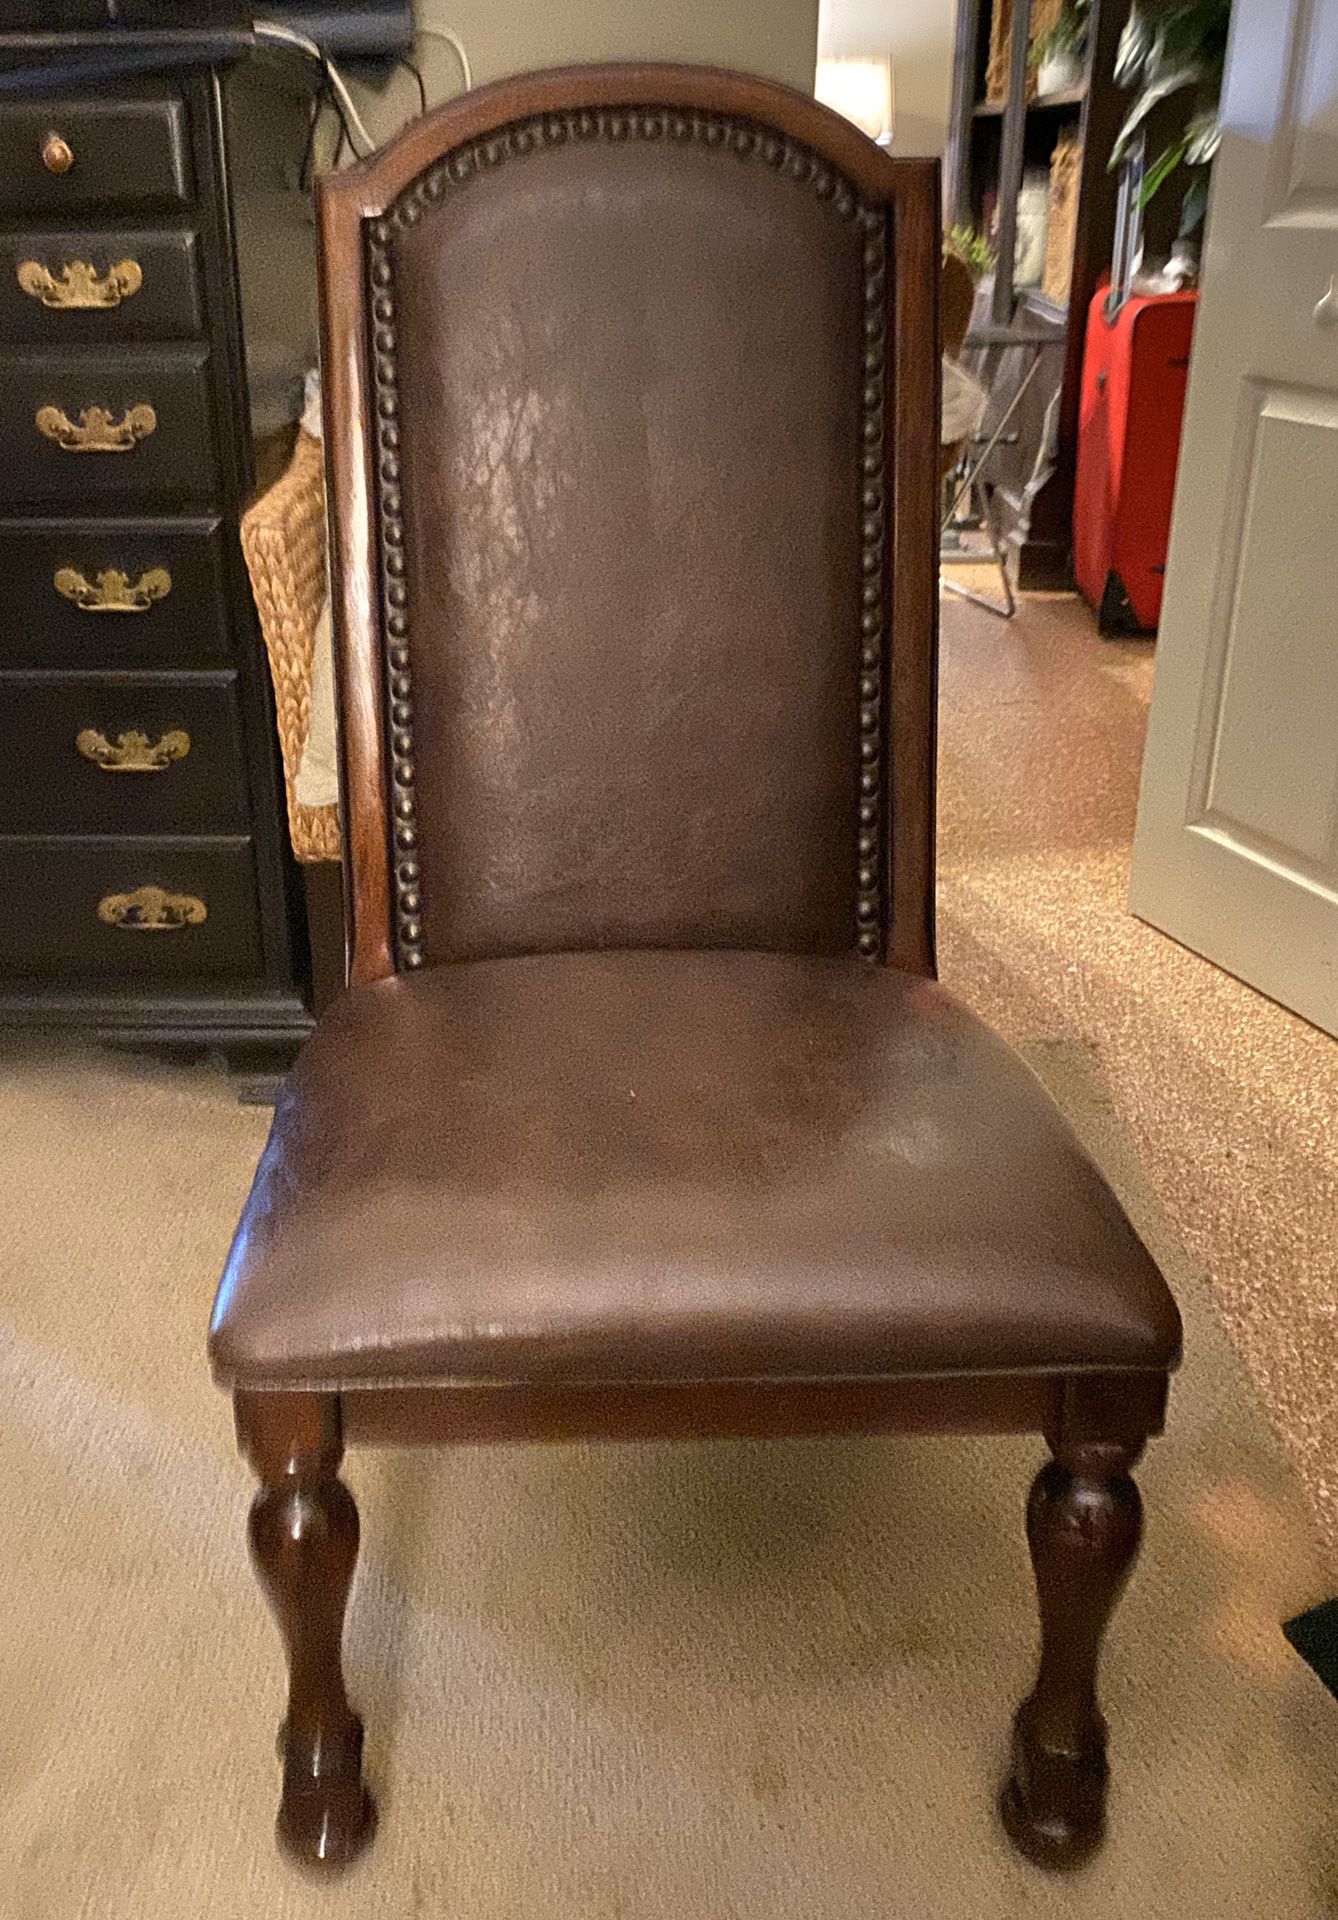 4 beautiful dining chairs for free. Seat needs to be reupholstered, other then that in great condition